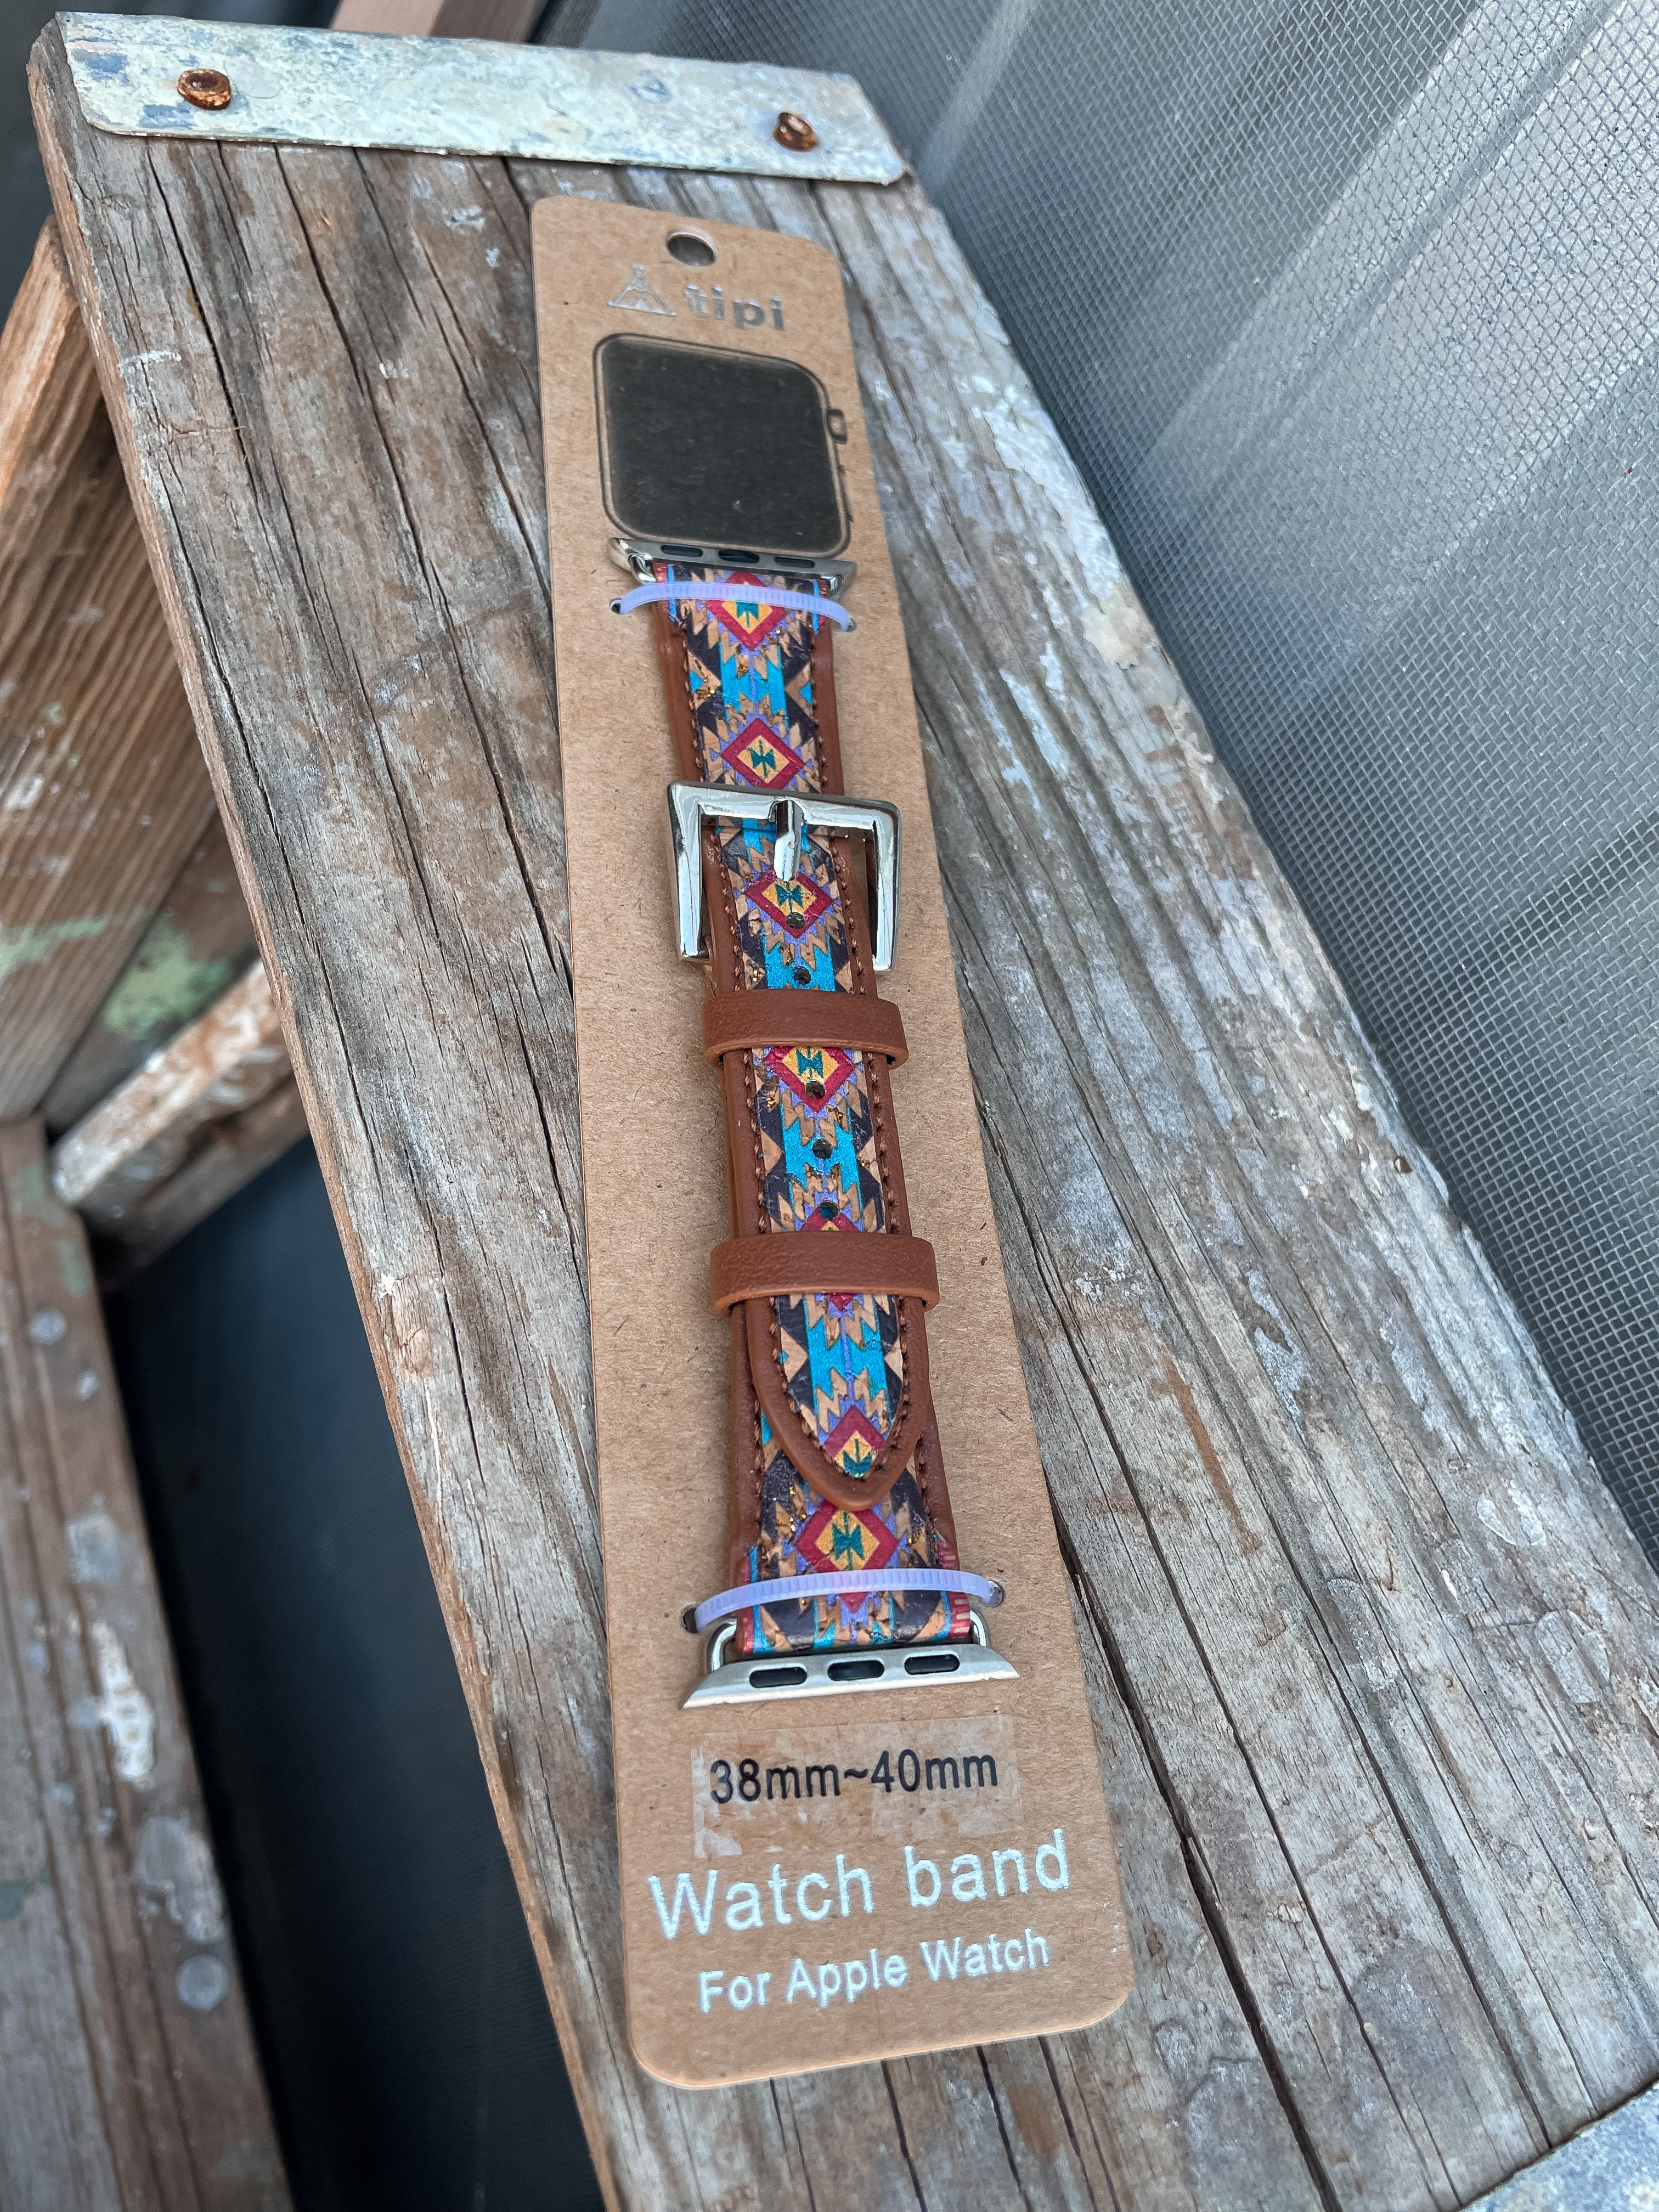 The Omak Watch Band